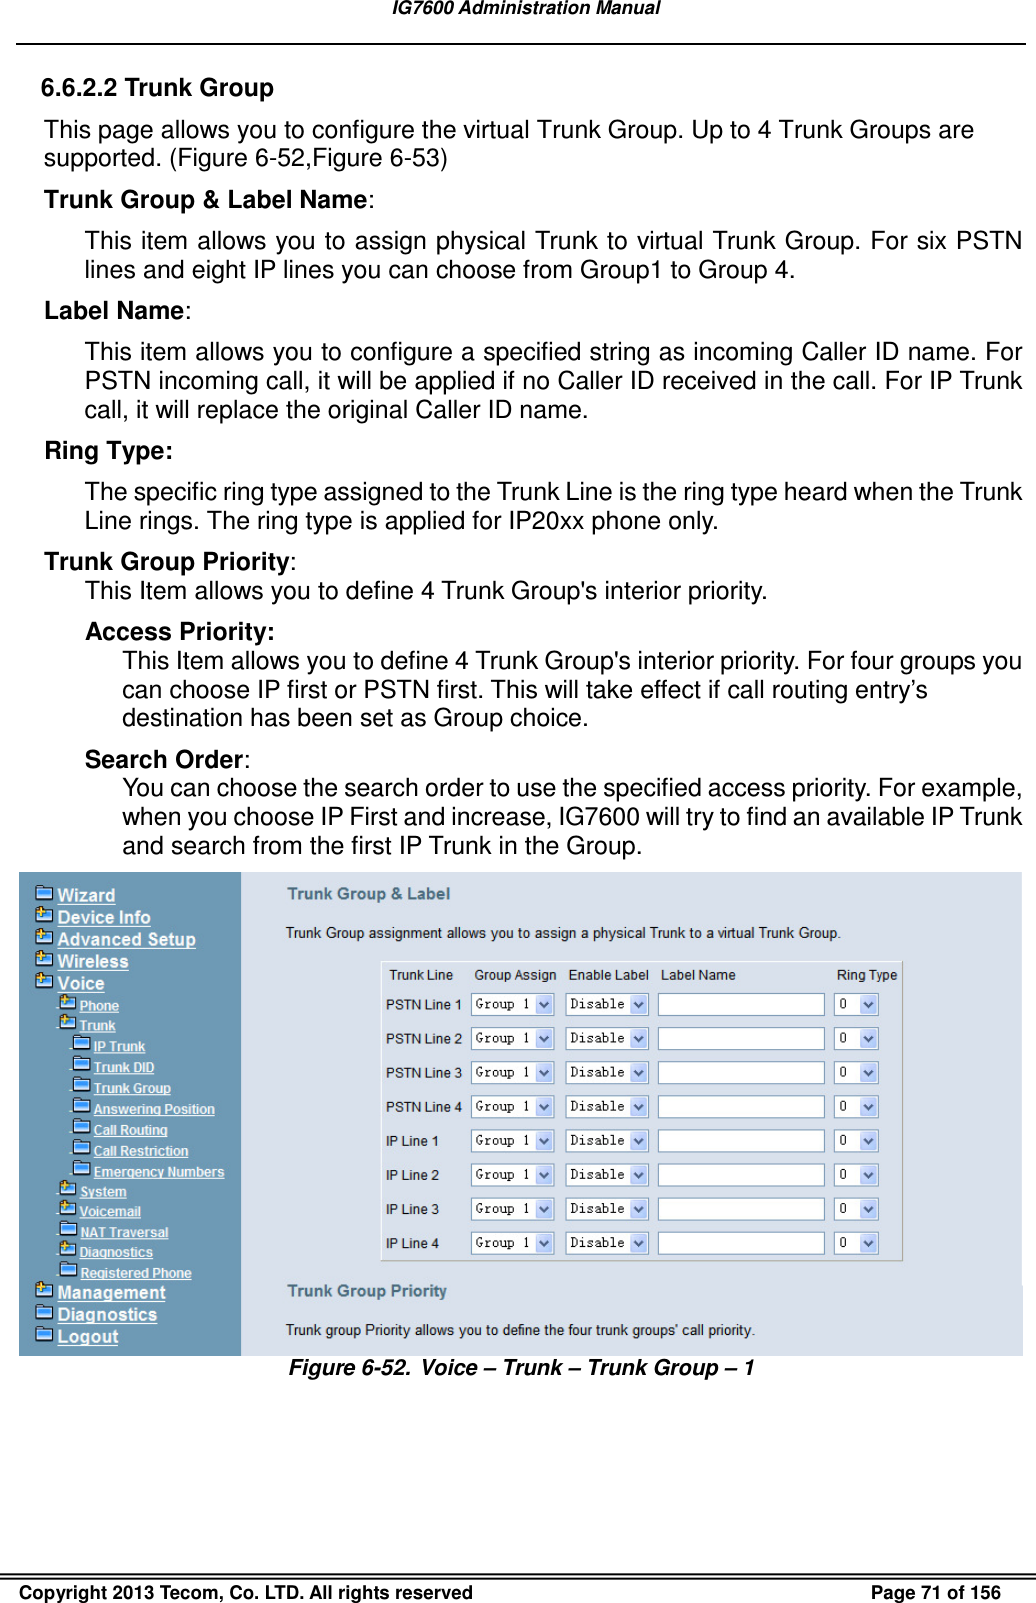   IG7600 Administration Manual  Copyright 2013 Tecom, Co. LTD. All rights reserved  Page 71 of 156 6.6.2.2 Trunk Group This page allows you to configure the virtual Trunk Group. Up to 4 Trunk Groups are supported. (Figure 6-52,Figure 6-53) Trunk Group &amp; Label Name: This item allows you to assign physical Trunk to virtual Trunk Group. For six PSTN lines and eight IP lines you can choose from Group1 to Group 4. Label Name: This item allows you to configure a specified string as incoming Caller ID name. For PSTN incoming call, it will be applied if no Caller ID received in the call. For IP Trunk call, it will replace the original Caller ID name. Ring Type: The specific ring type assigned to the Trunk Line is the ring type heard when the Trunk Line rings. The ring type is applied for IP20xx phone only. Trunk Group Priority: This Item allows you to define 4 Trunk Group&apos;s interior priority.   Access Priority: This Item allows you to define 4 Trunk Group&apos;s interior priority. For four groups you can choose IP first or PSTN first. This will take effect if call routing entry’s destination has been set as Group choice. Search Order: You can choose the search order to use the specified access priority. For example, when you choose IP First and increase, IG7600 will try to find an available IP Trunk and search from the first IP Trunk in the Group.  Figure 6-52.  Voice – Trunk – Trunk Group – 1  